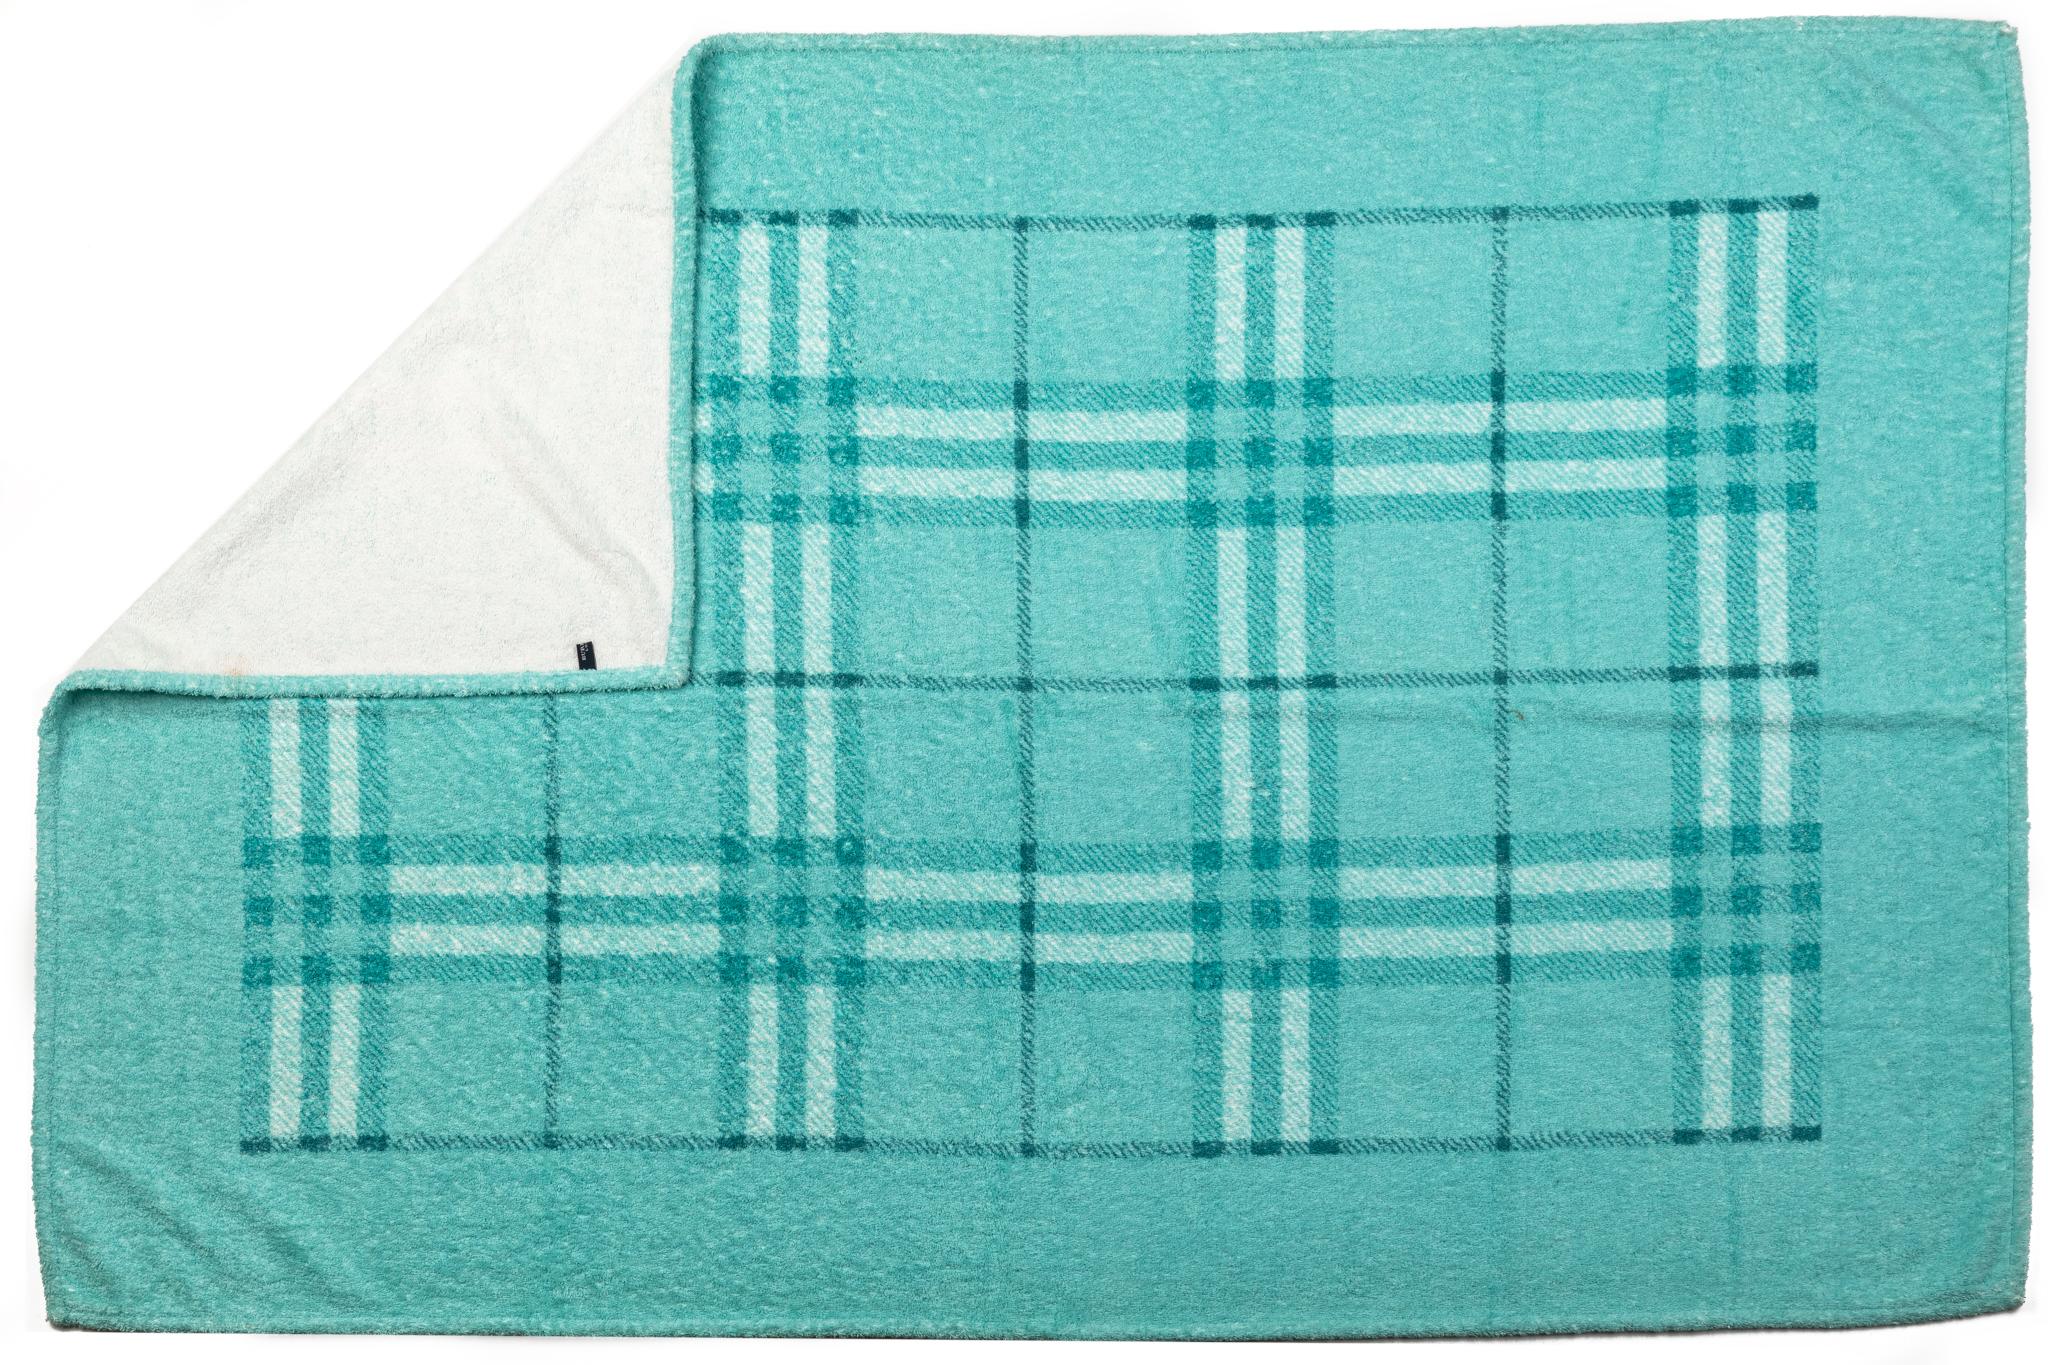 Burberry brand new 100% cotton beach towel in turquoise checkered pattern. Care tag attached.